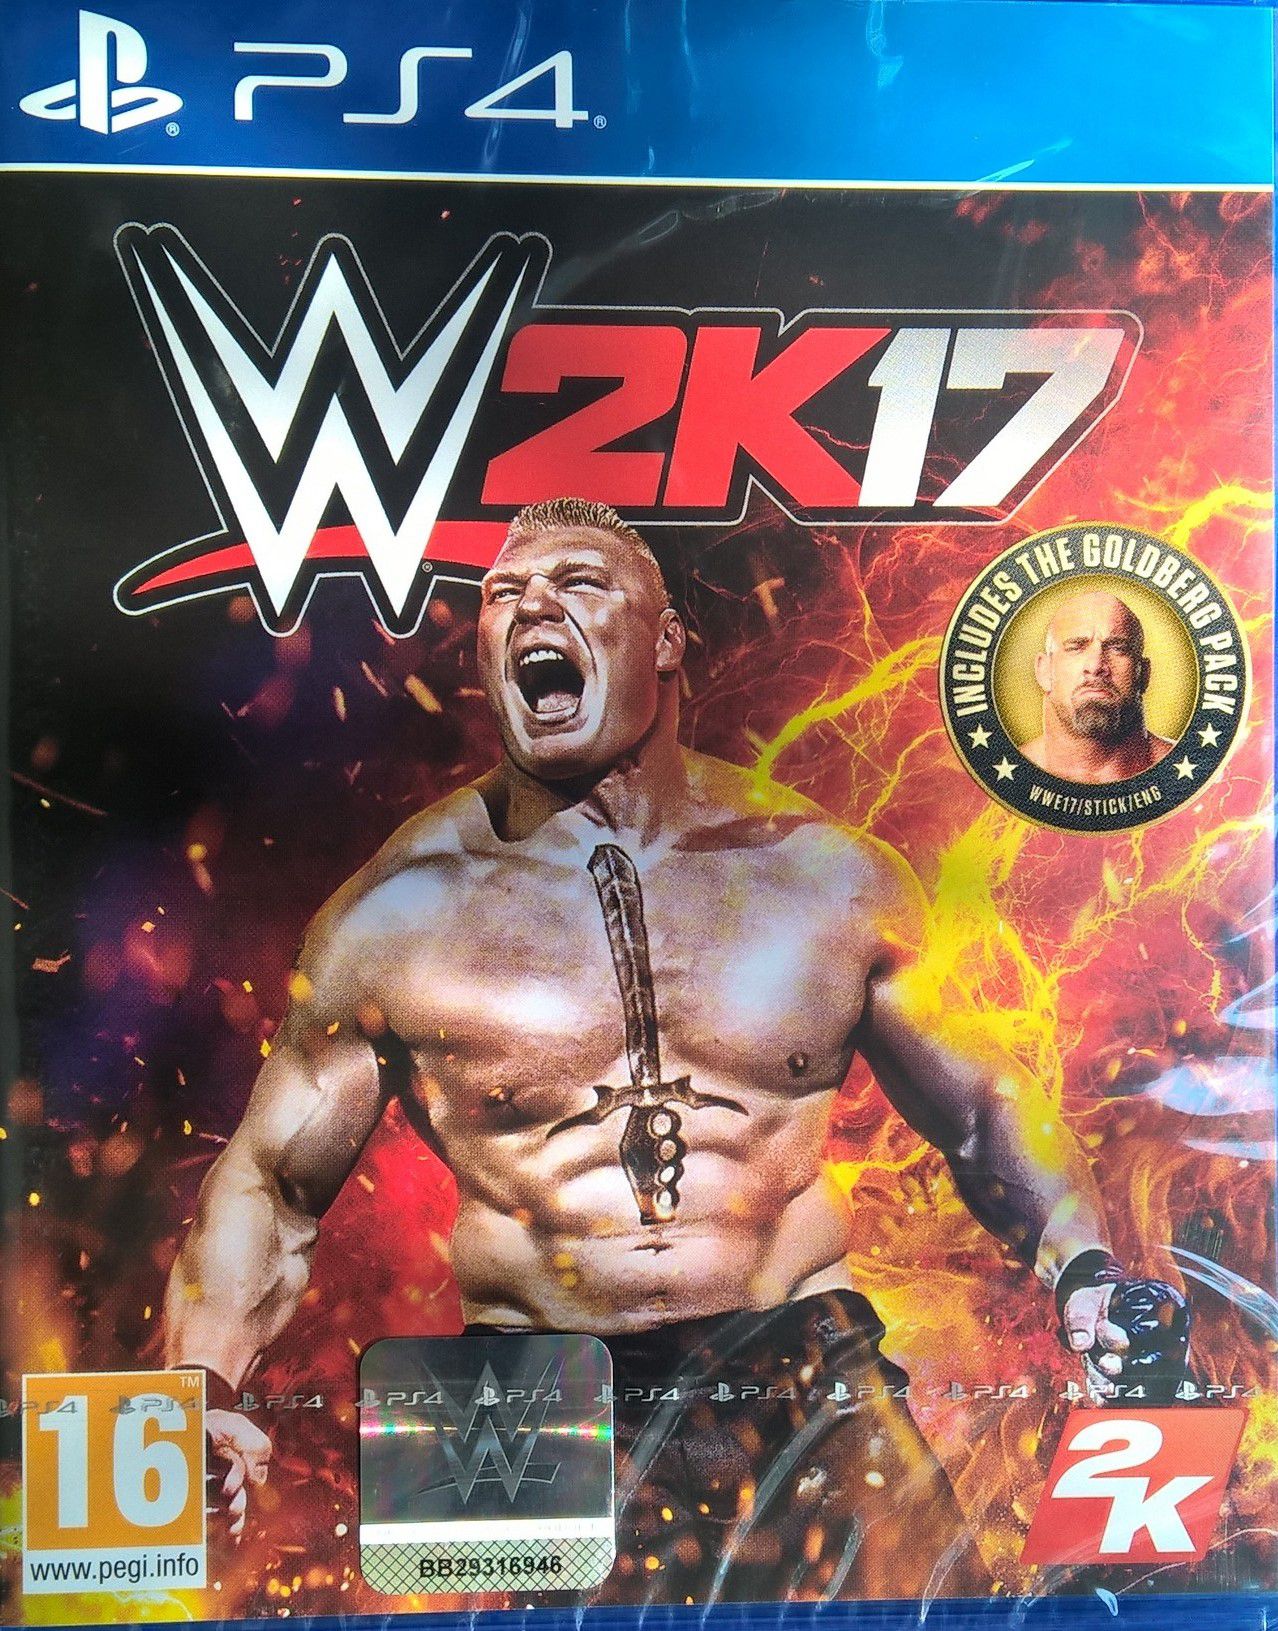 Buy WWE 2K17 ( PS4 ) Online at Best Price in India